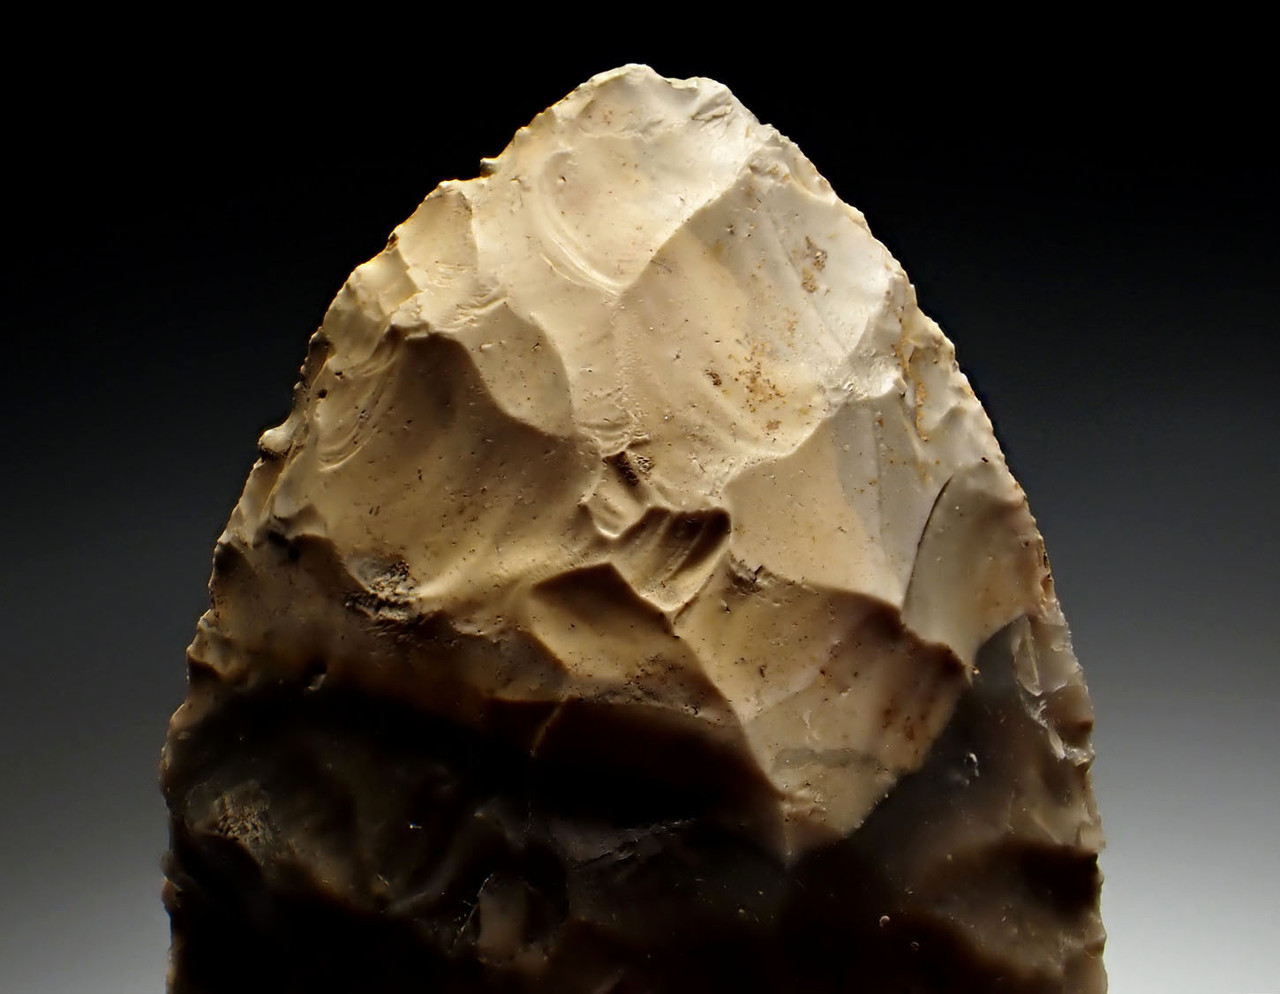 FINEST INVESTMENT GRADE LOWER PALEOLITHIC ACHEULEAN FLINT HAND AXE FROM THE FAMOUS RICKSONS PIT IN ENGLAND  *M494